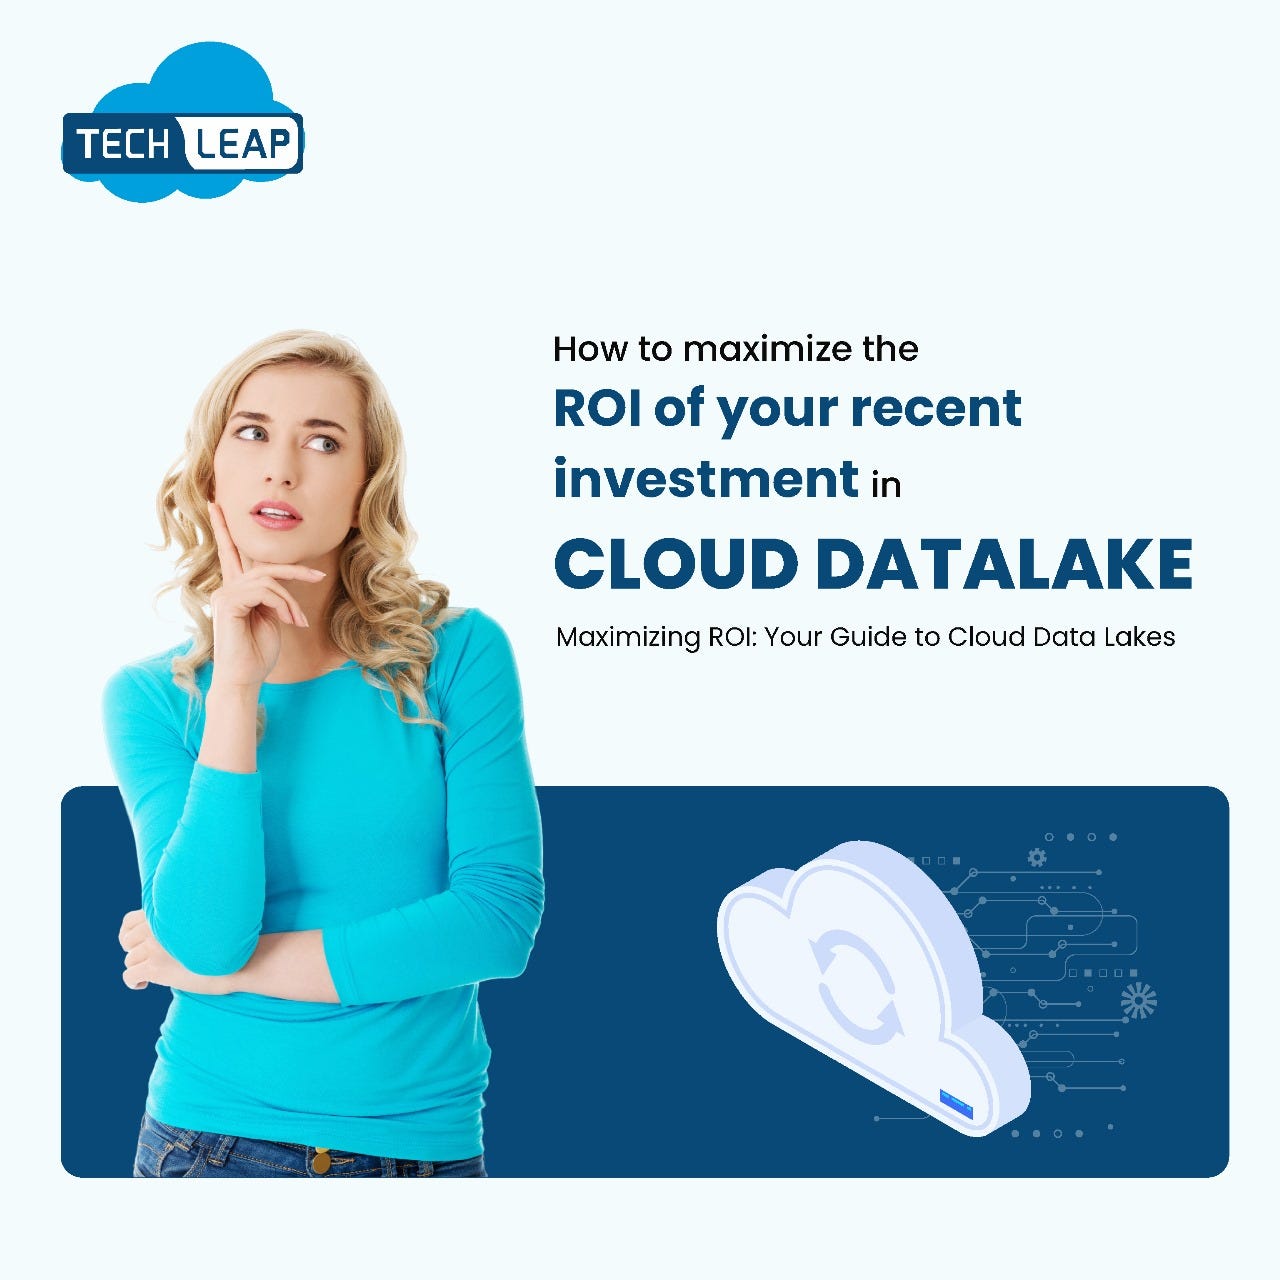 How to maximize the ROI of your recent investment in Cloud Datalake?